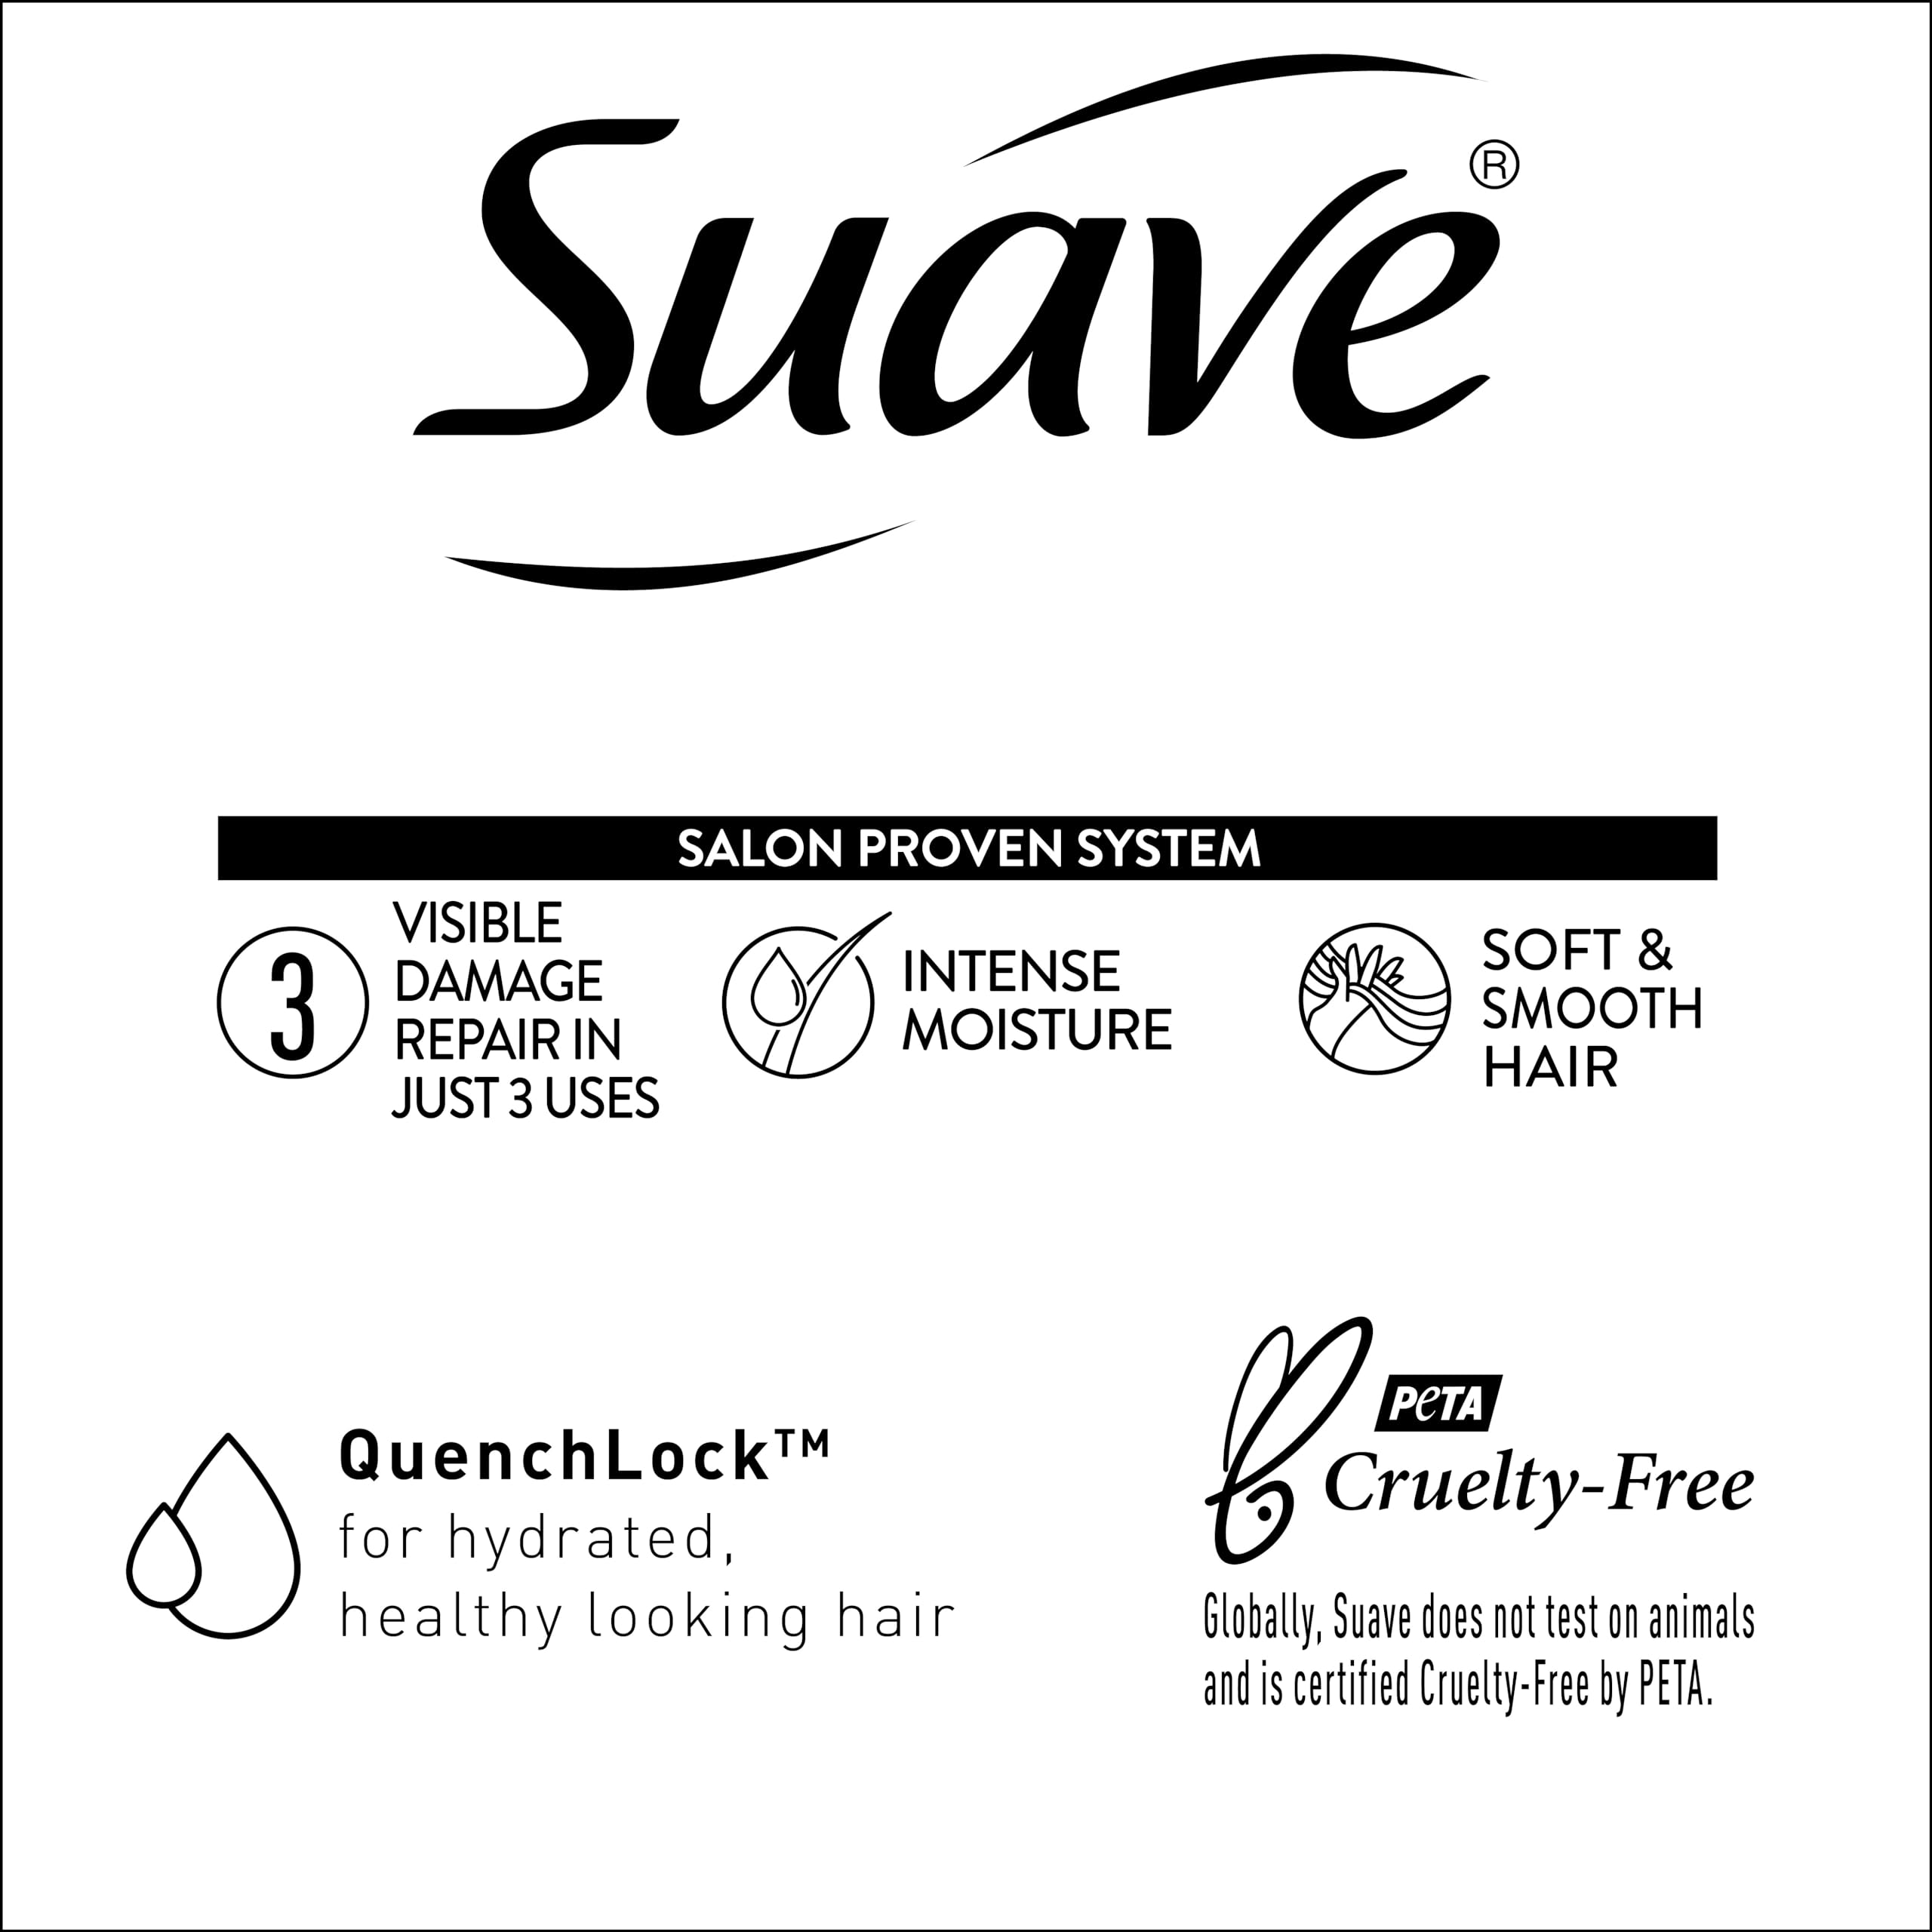 Suave Coconut Oil Damage Repair Conditioner, for Normal, Dry and Damaged Hair, with Pure Coconut Oil Infusion, 28 oz Pack of 4